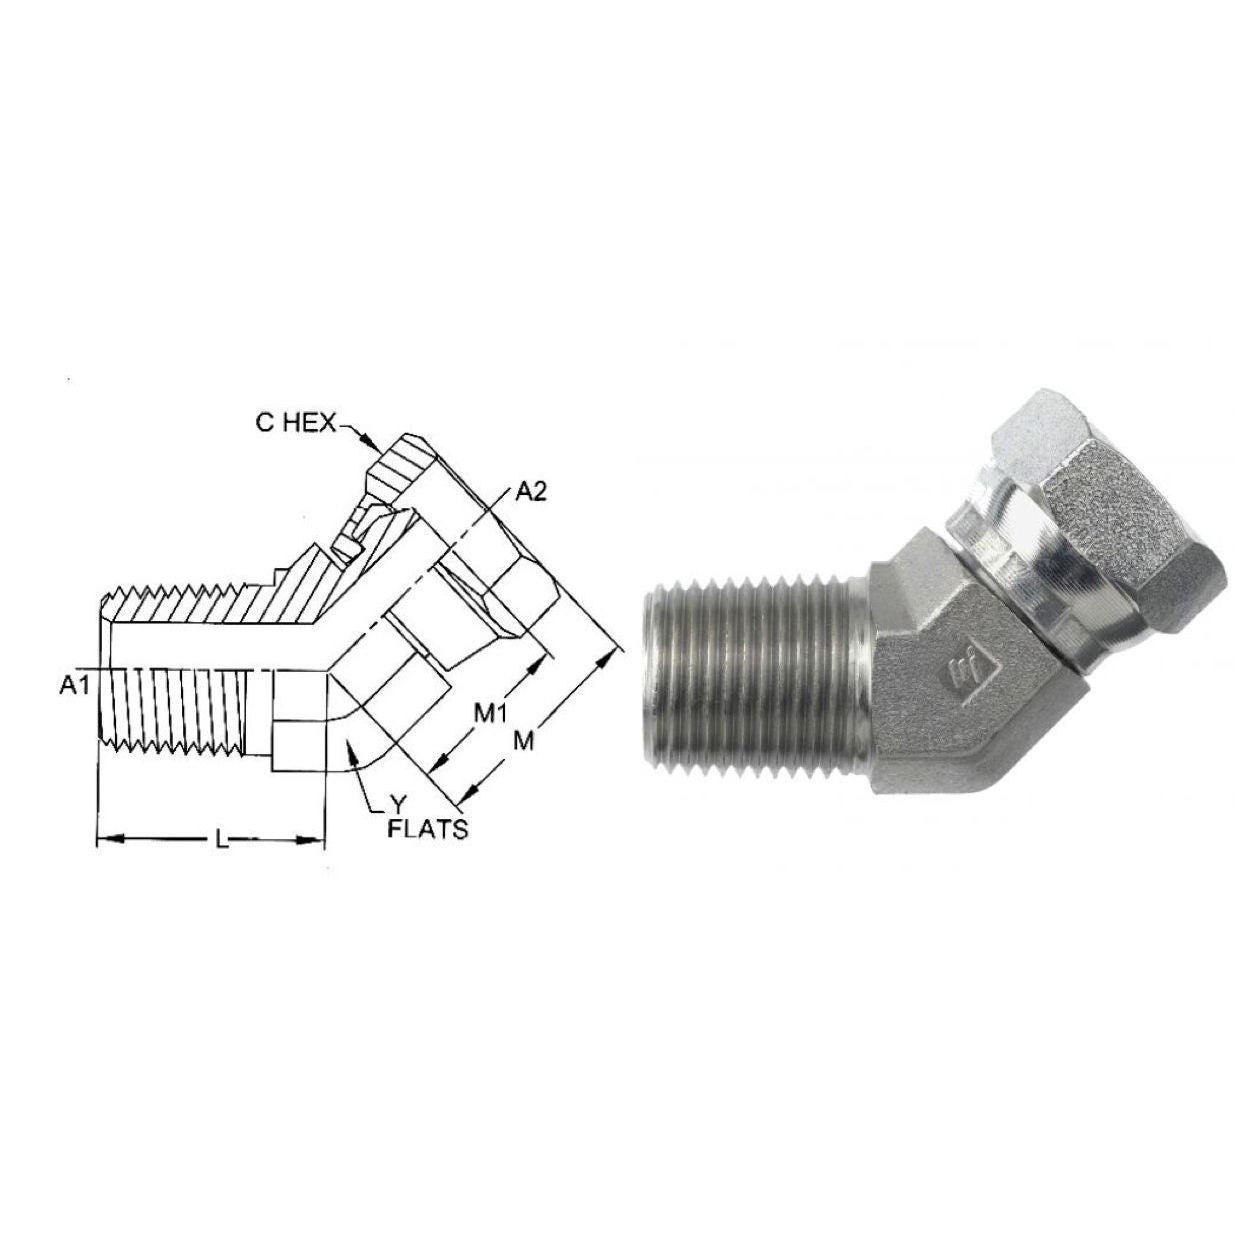 1503-12-12-SS : OneHydraulics 45-Degree Elbow, 0.75 (3/4) Male NPT x 0.75 (3/4) Female NPT Swivel, Stainless Steel, 2700psi